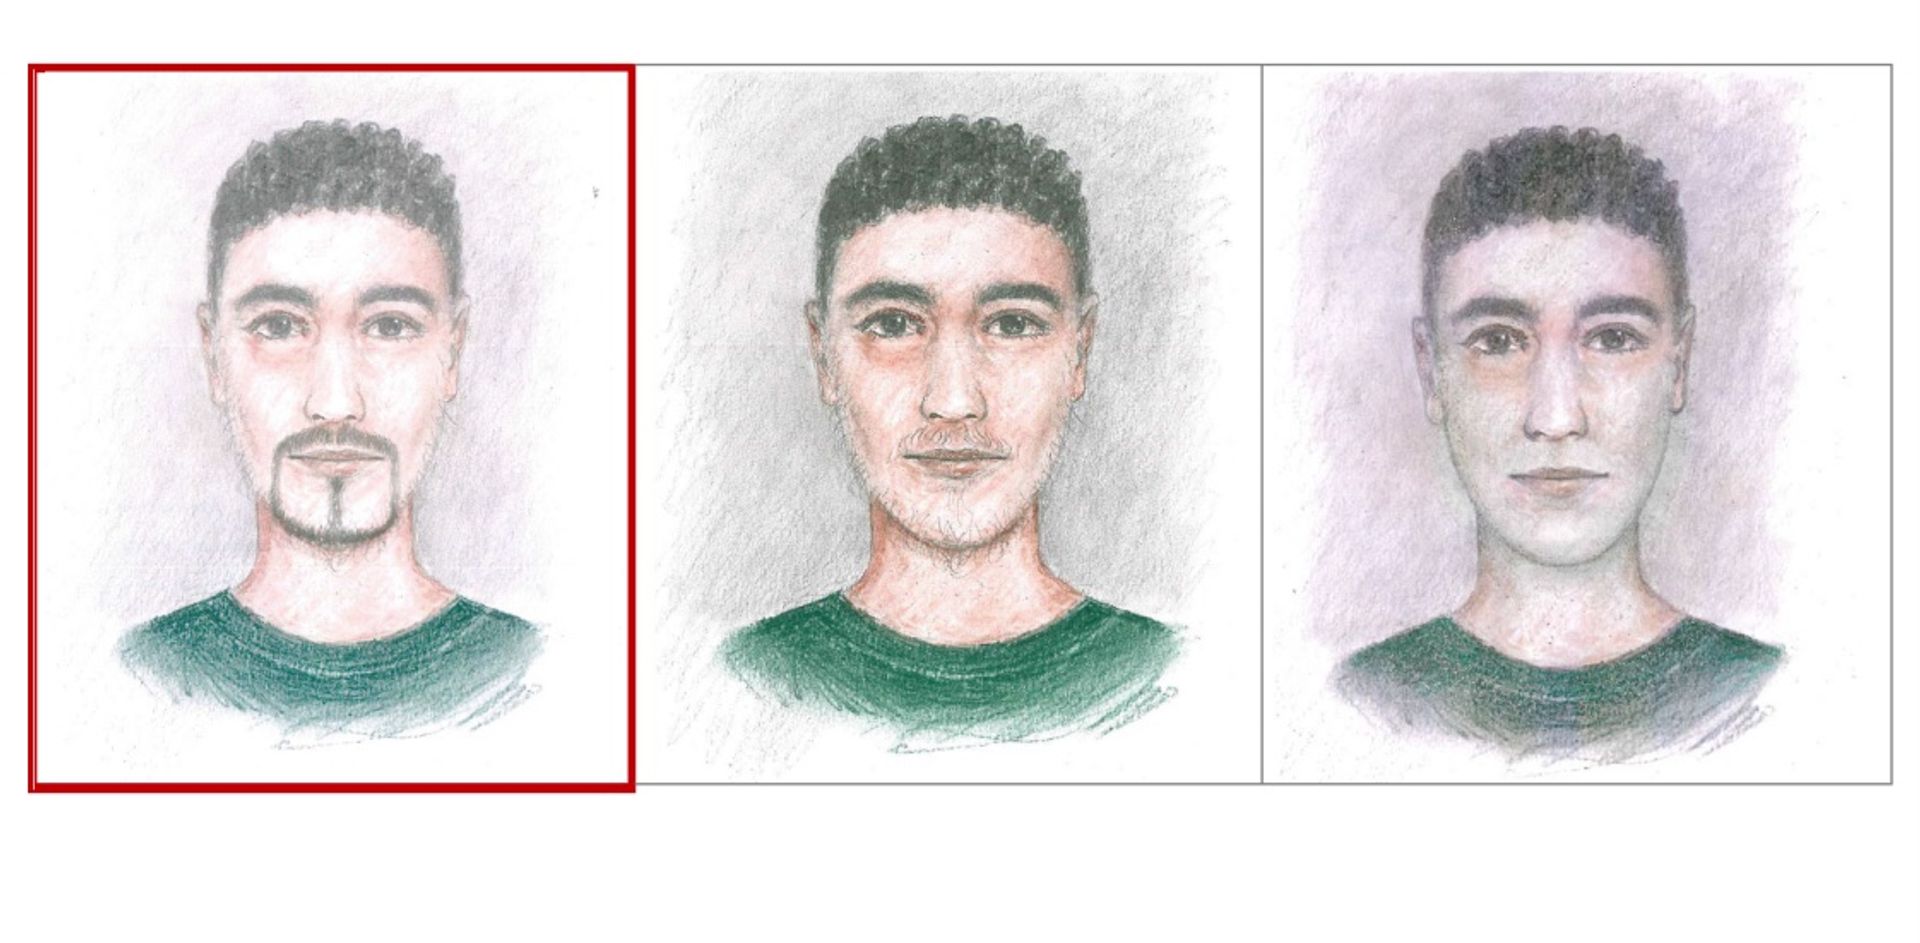 Police have released this portrait of a young man who purchased the getaway car, an Audi A6, from a private seller in Magdeburg. © Polizei Sachsen